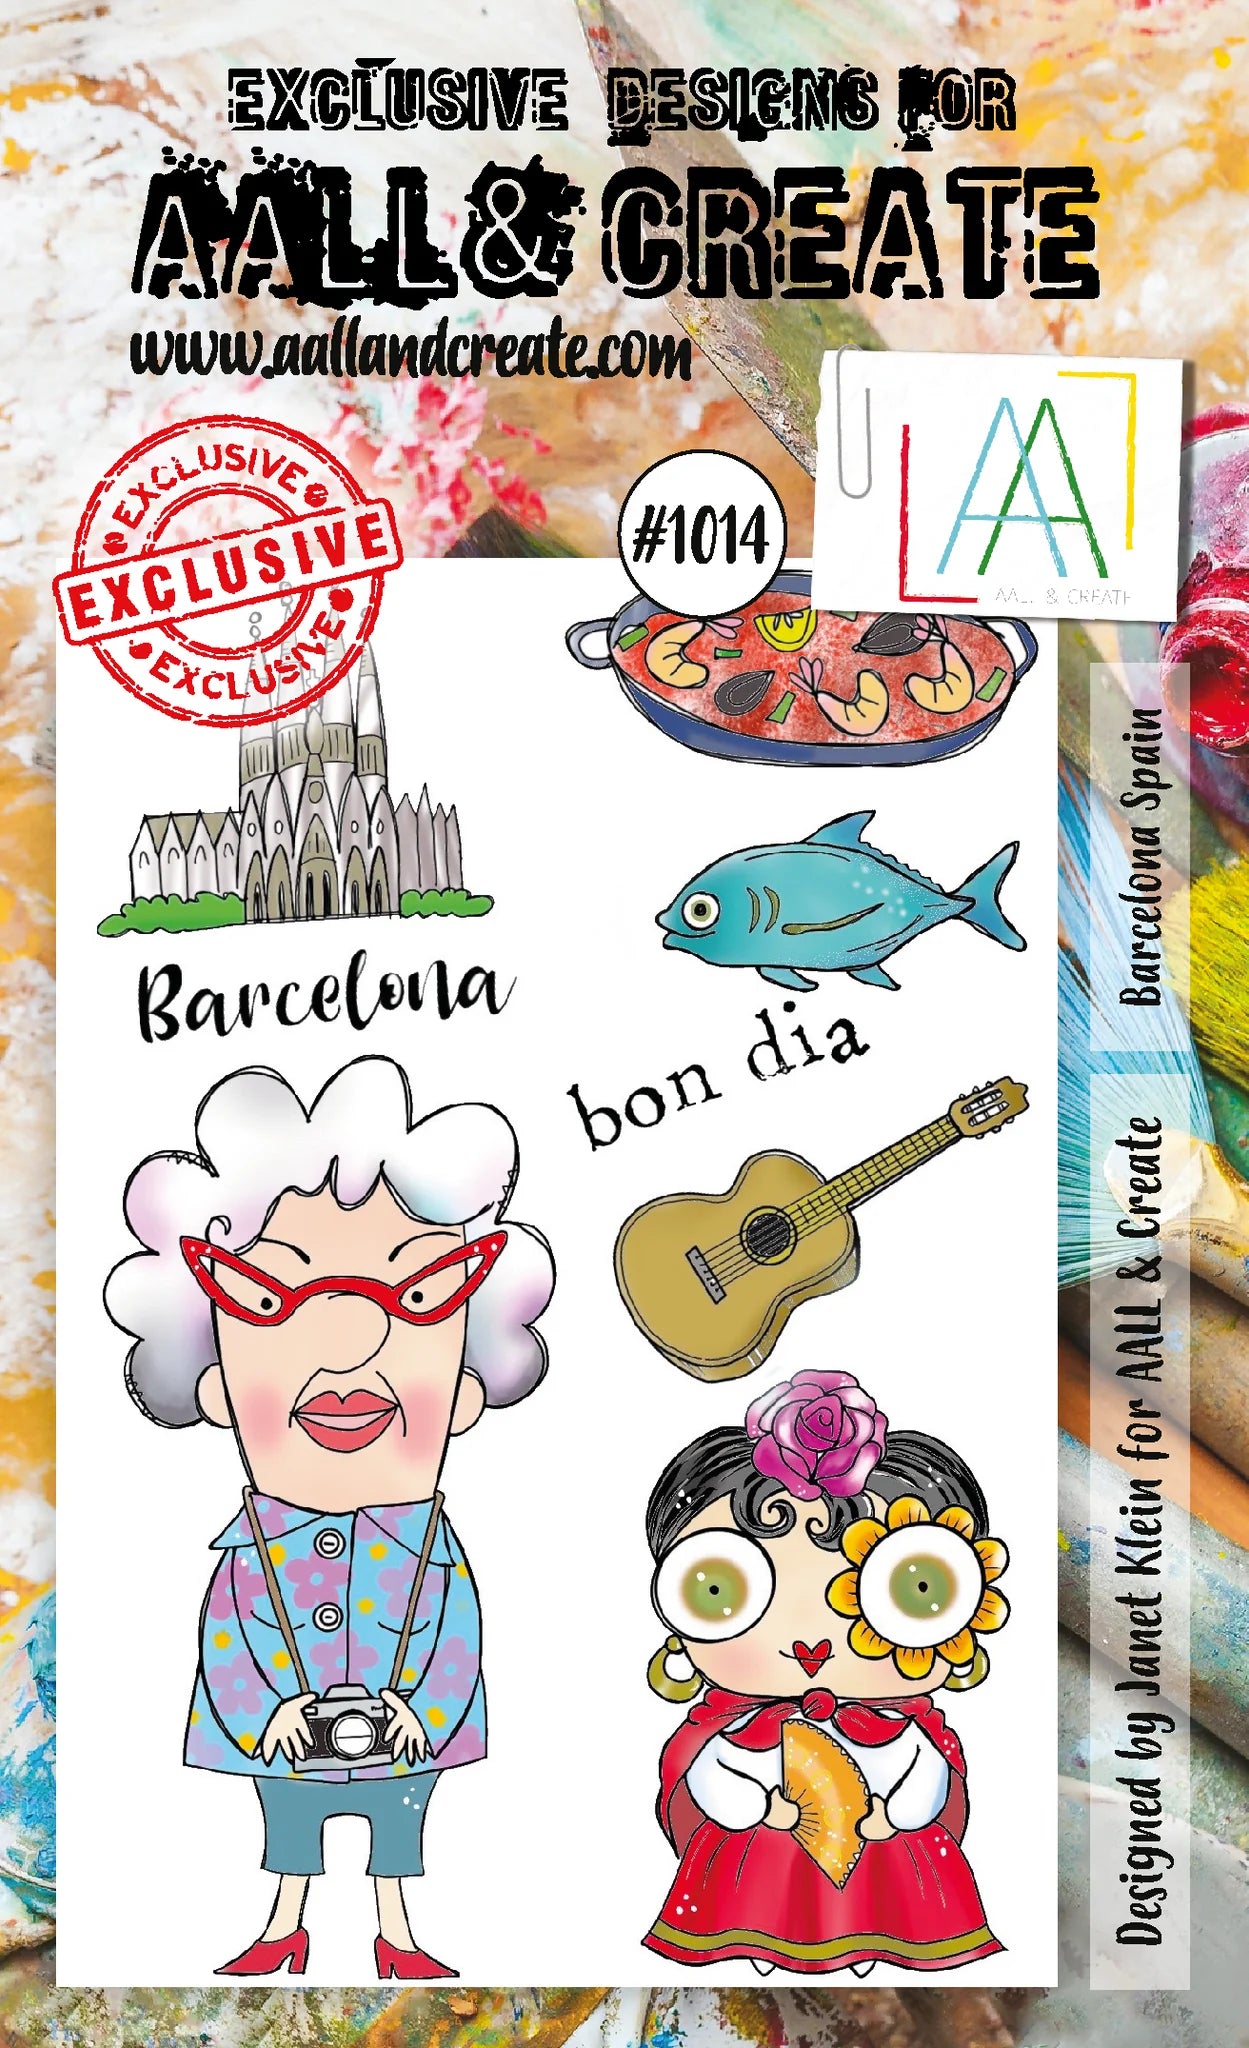 Where to Buy Stamps in Spain or Barcelona